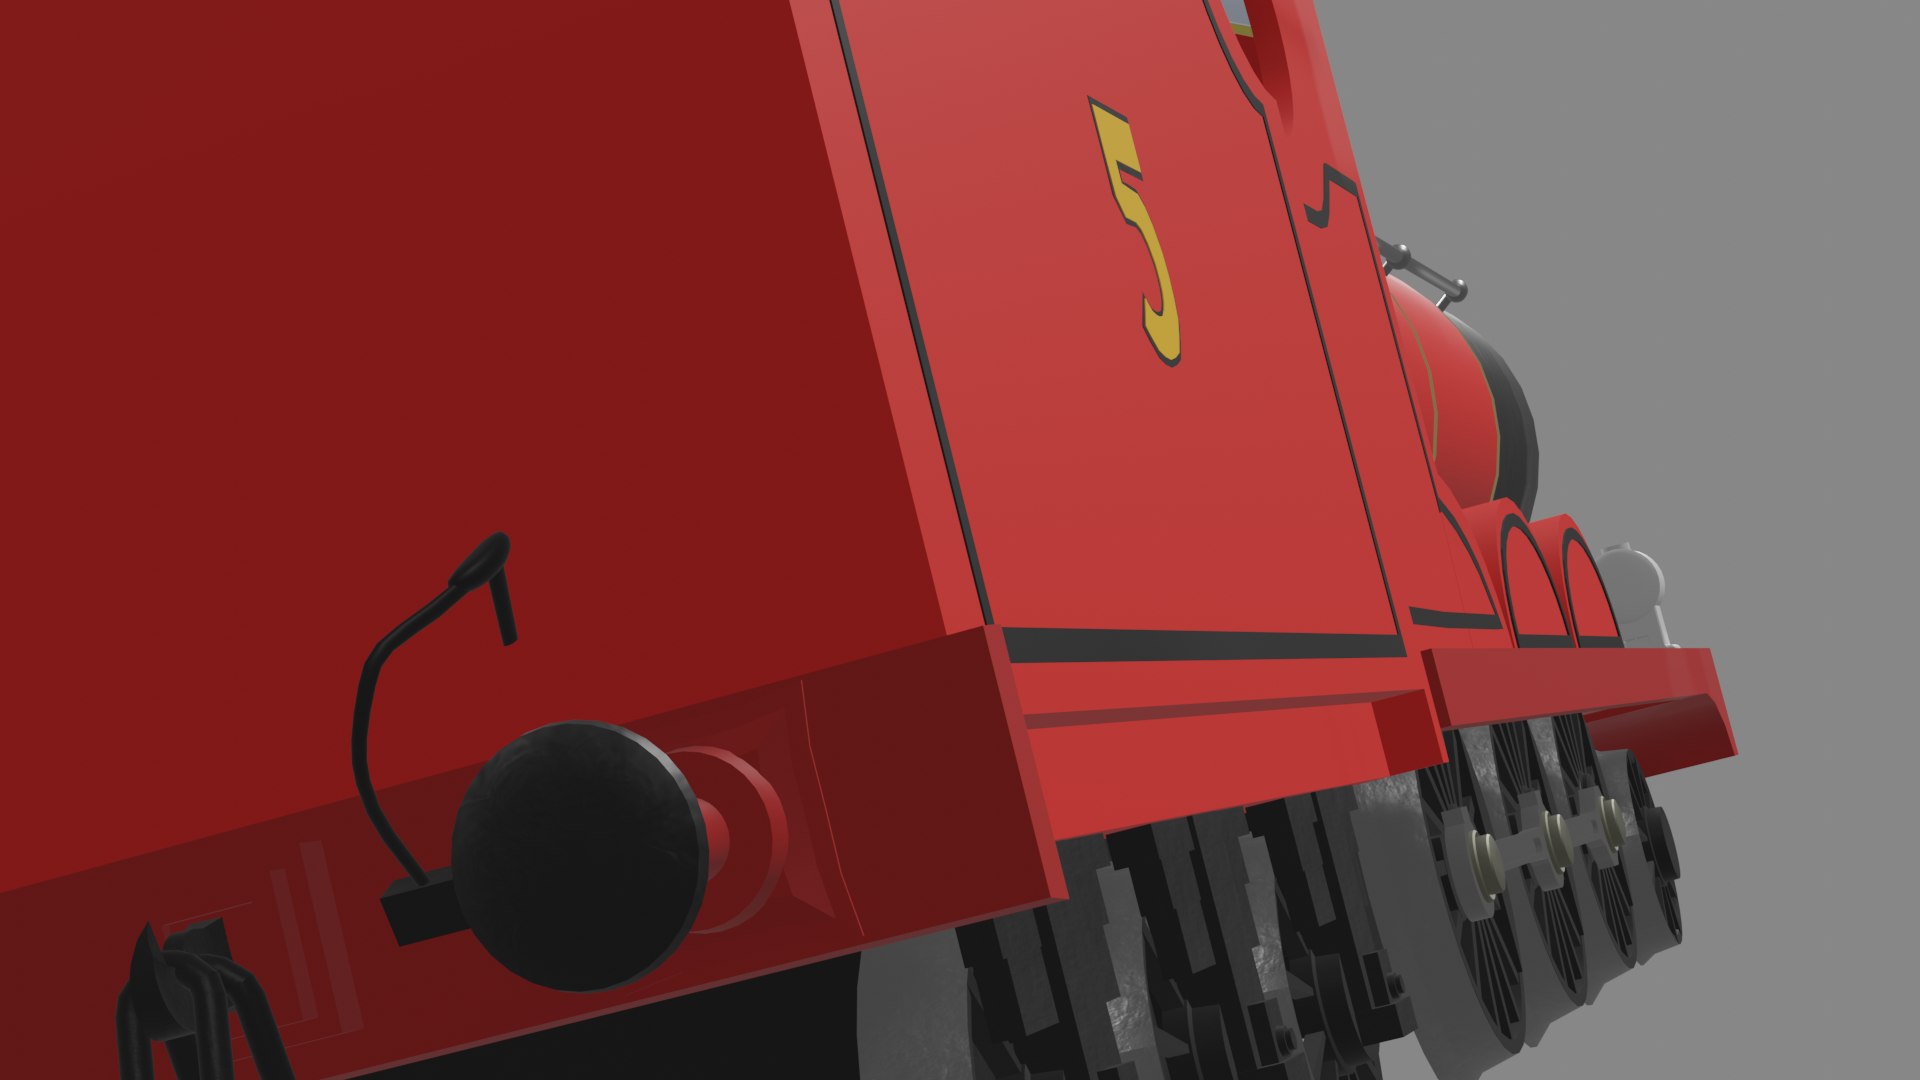 James the red engine mark 2 - - 3D Warehouse